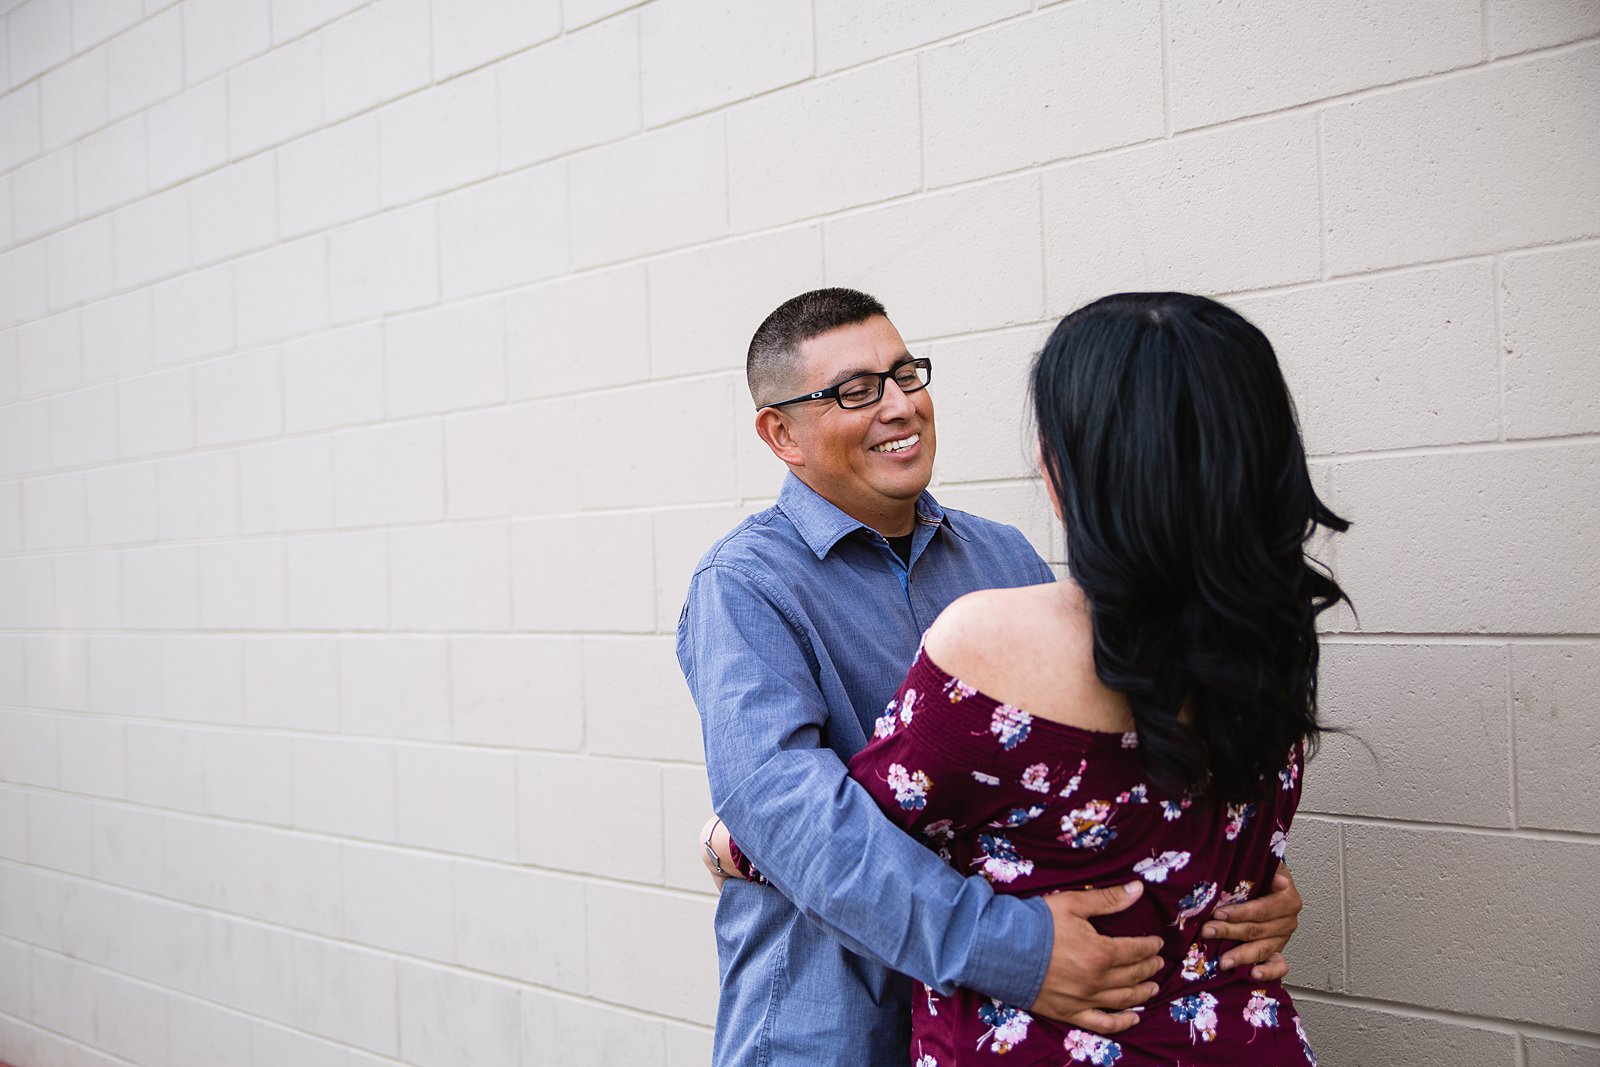 Couple looking at each other against brick wall during their engagement session by Phoenix wedding photographer PMA Photography.